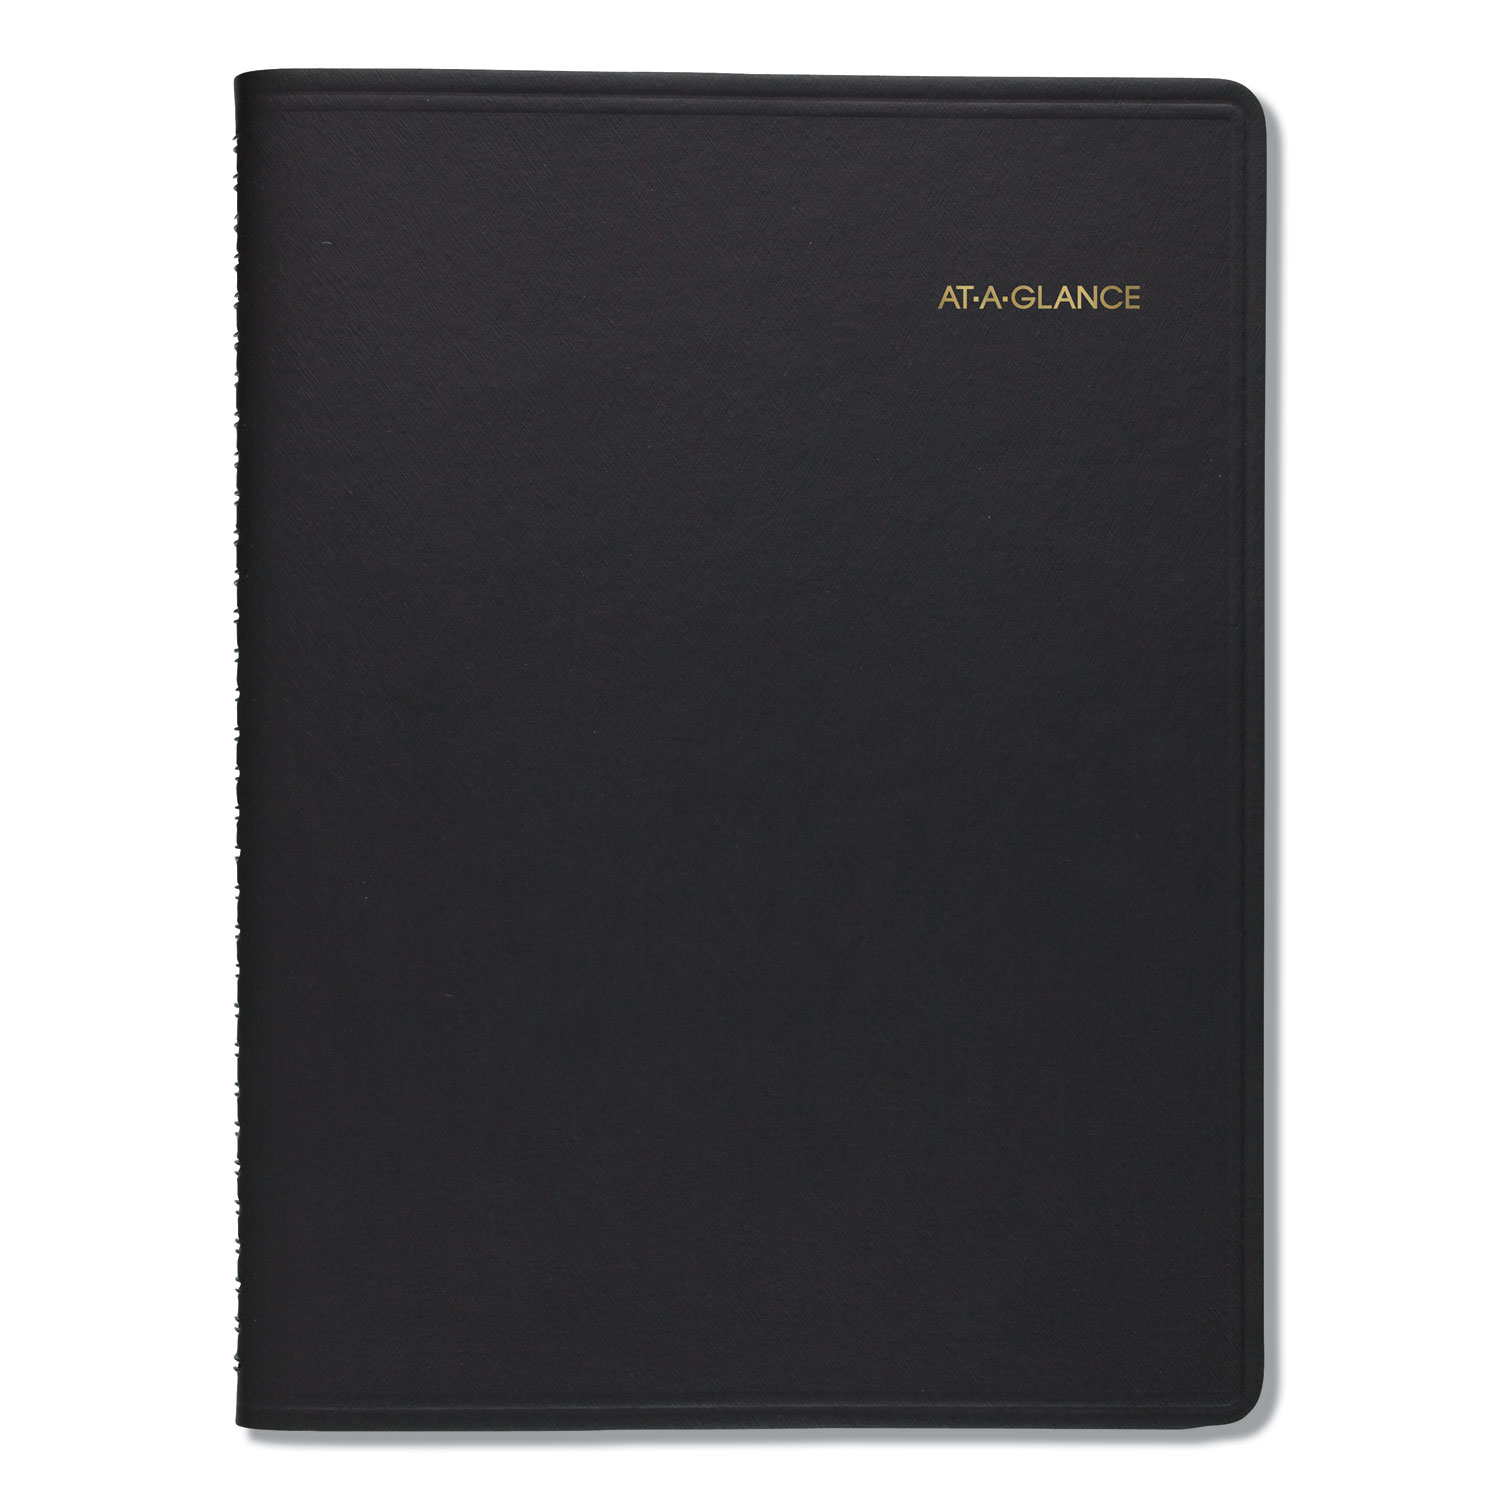  AT-A-GLANCE 7026005 Monthly Planner, 11 x 8 7/8, Black, 2020-2021 (AAG7026005) 